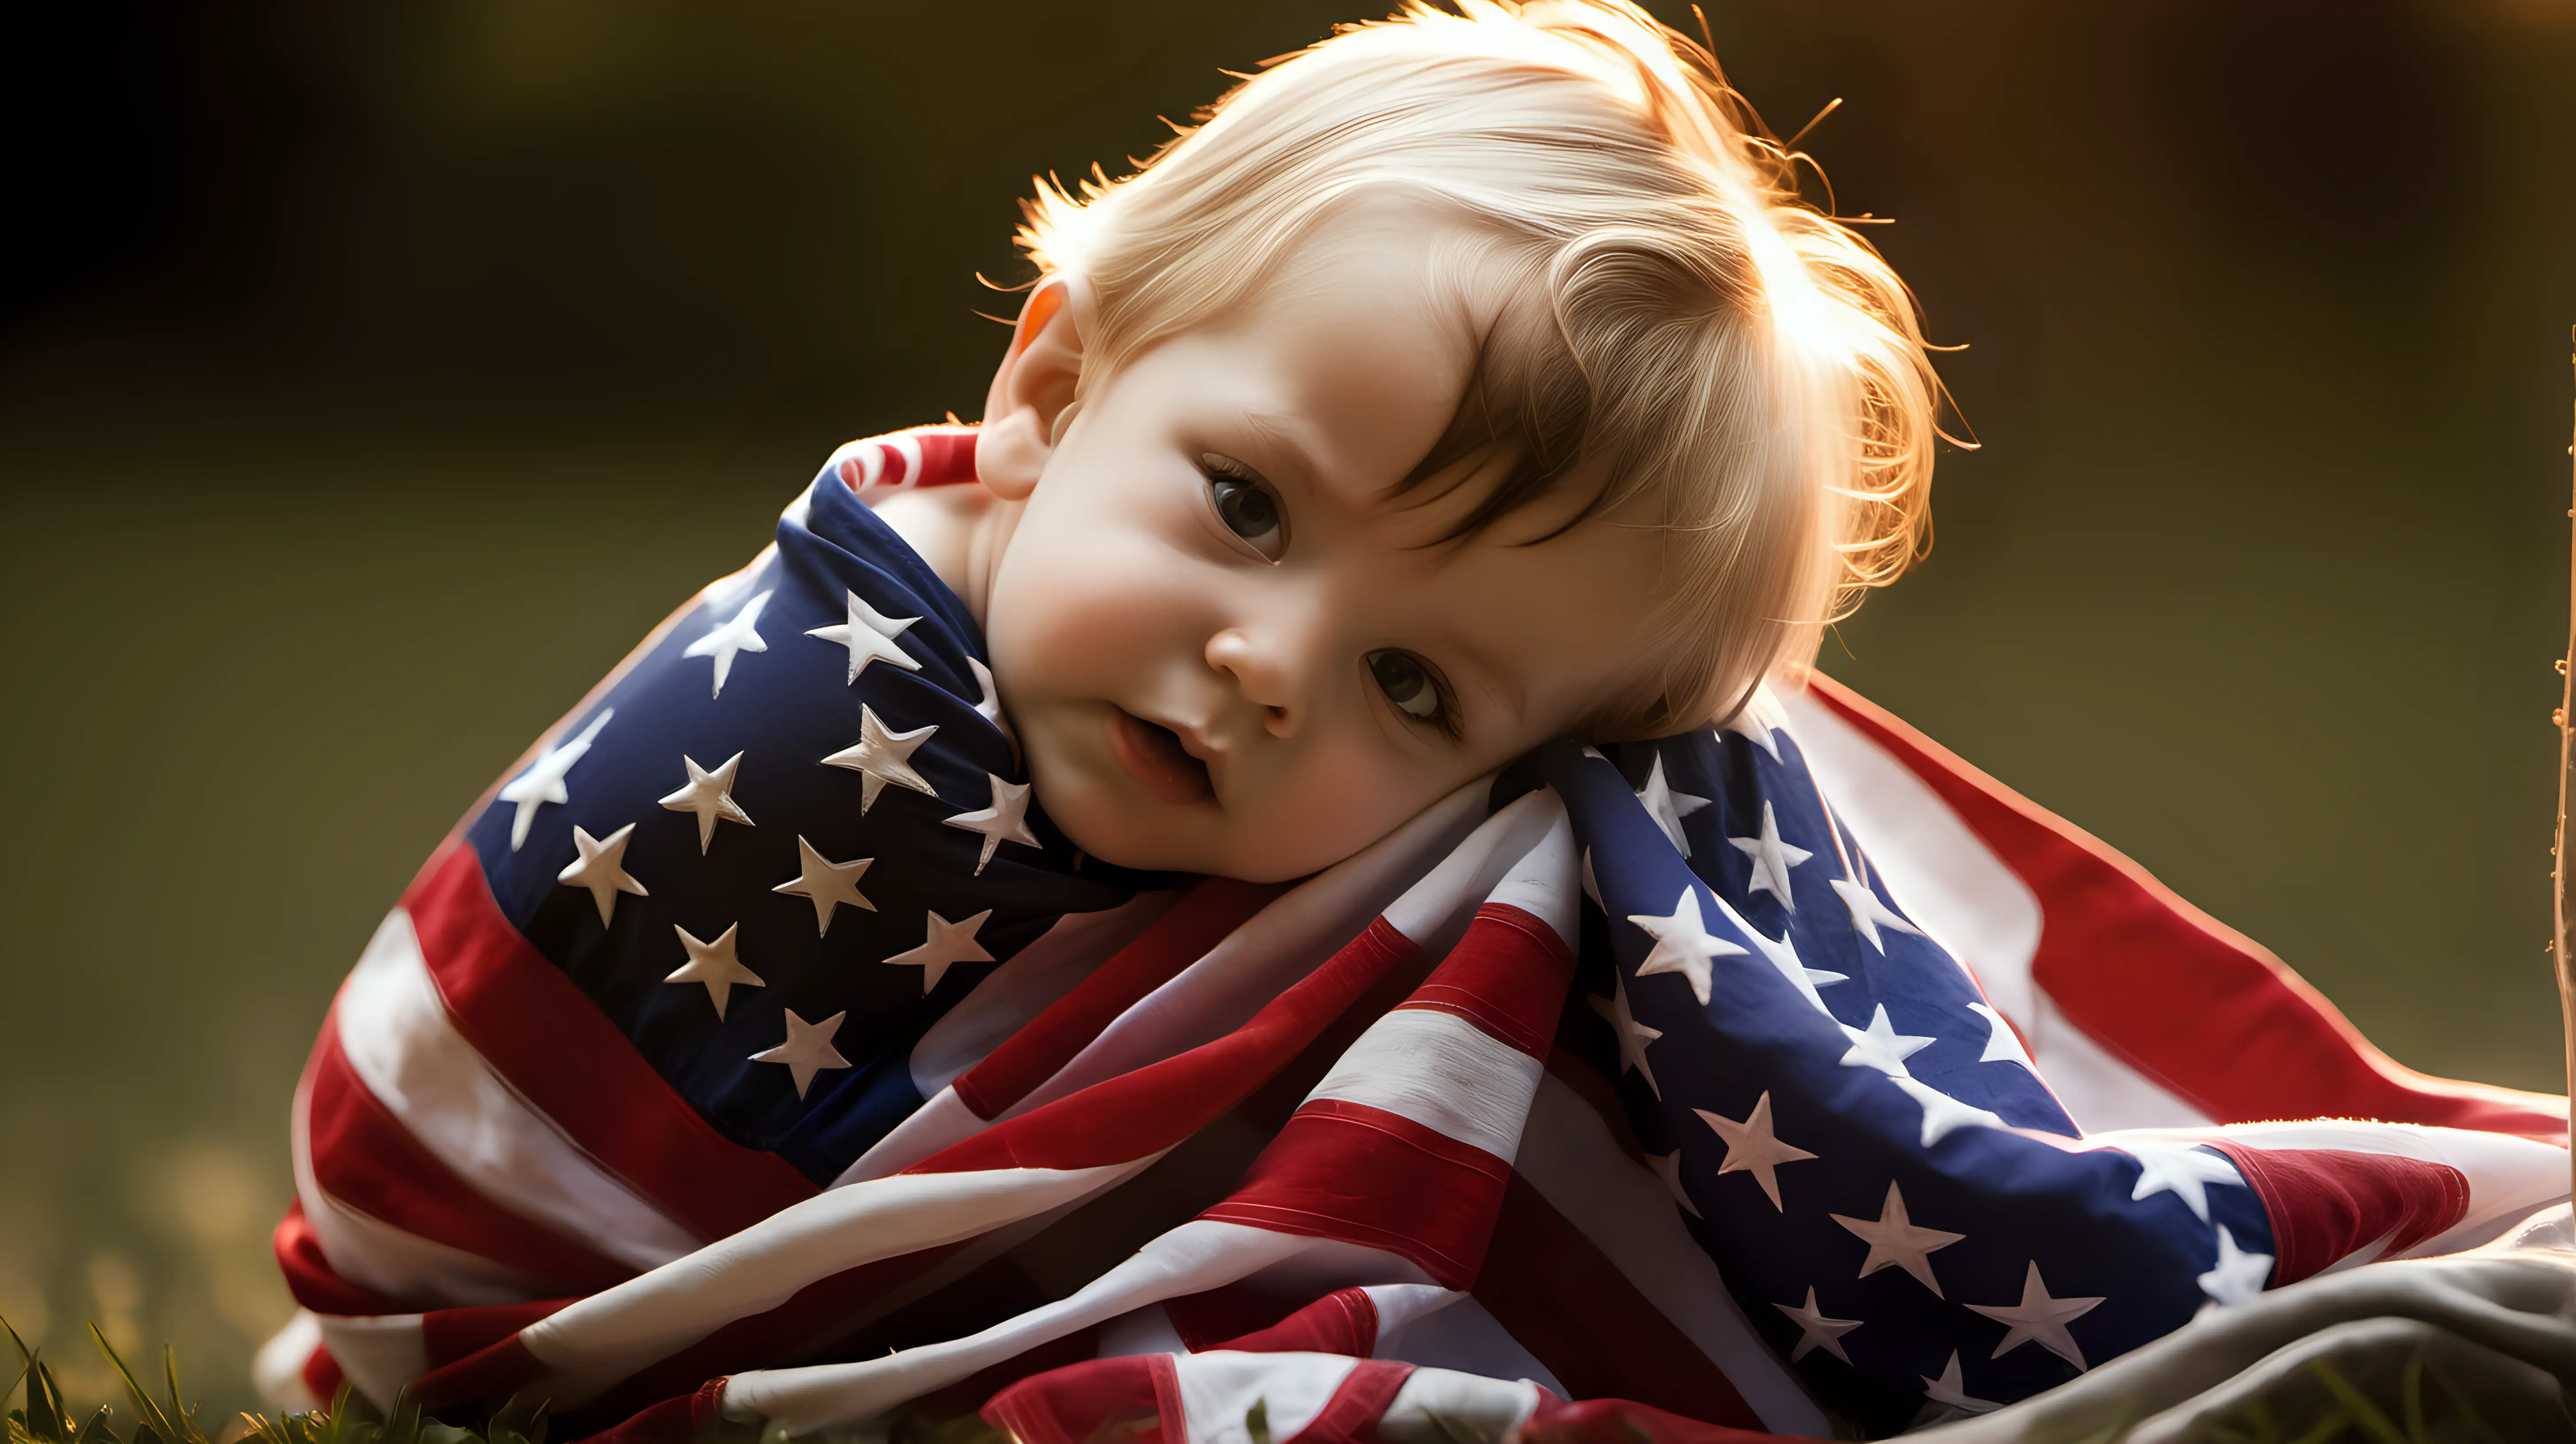 A young child wraps themselves in the American flag, planting a gentle kiss on its fabric, showing their affection and pride for their nation.
